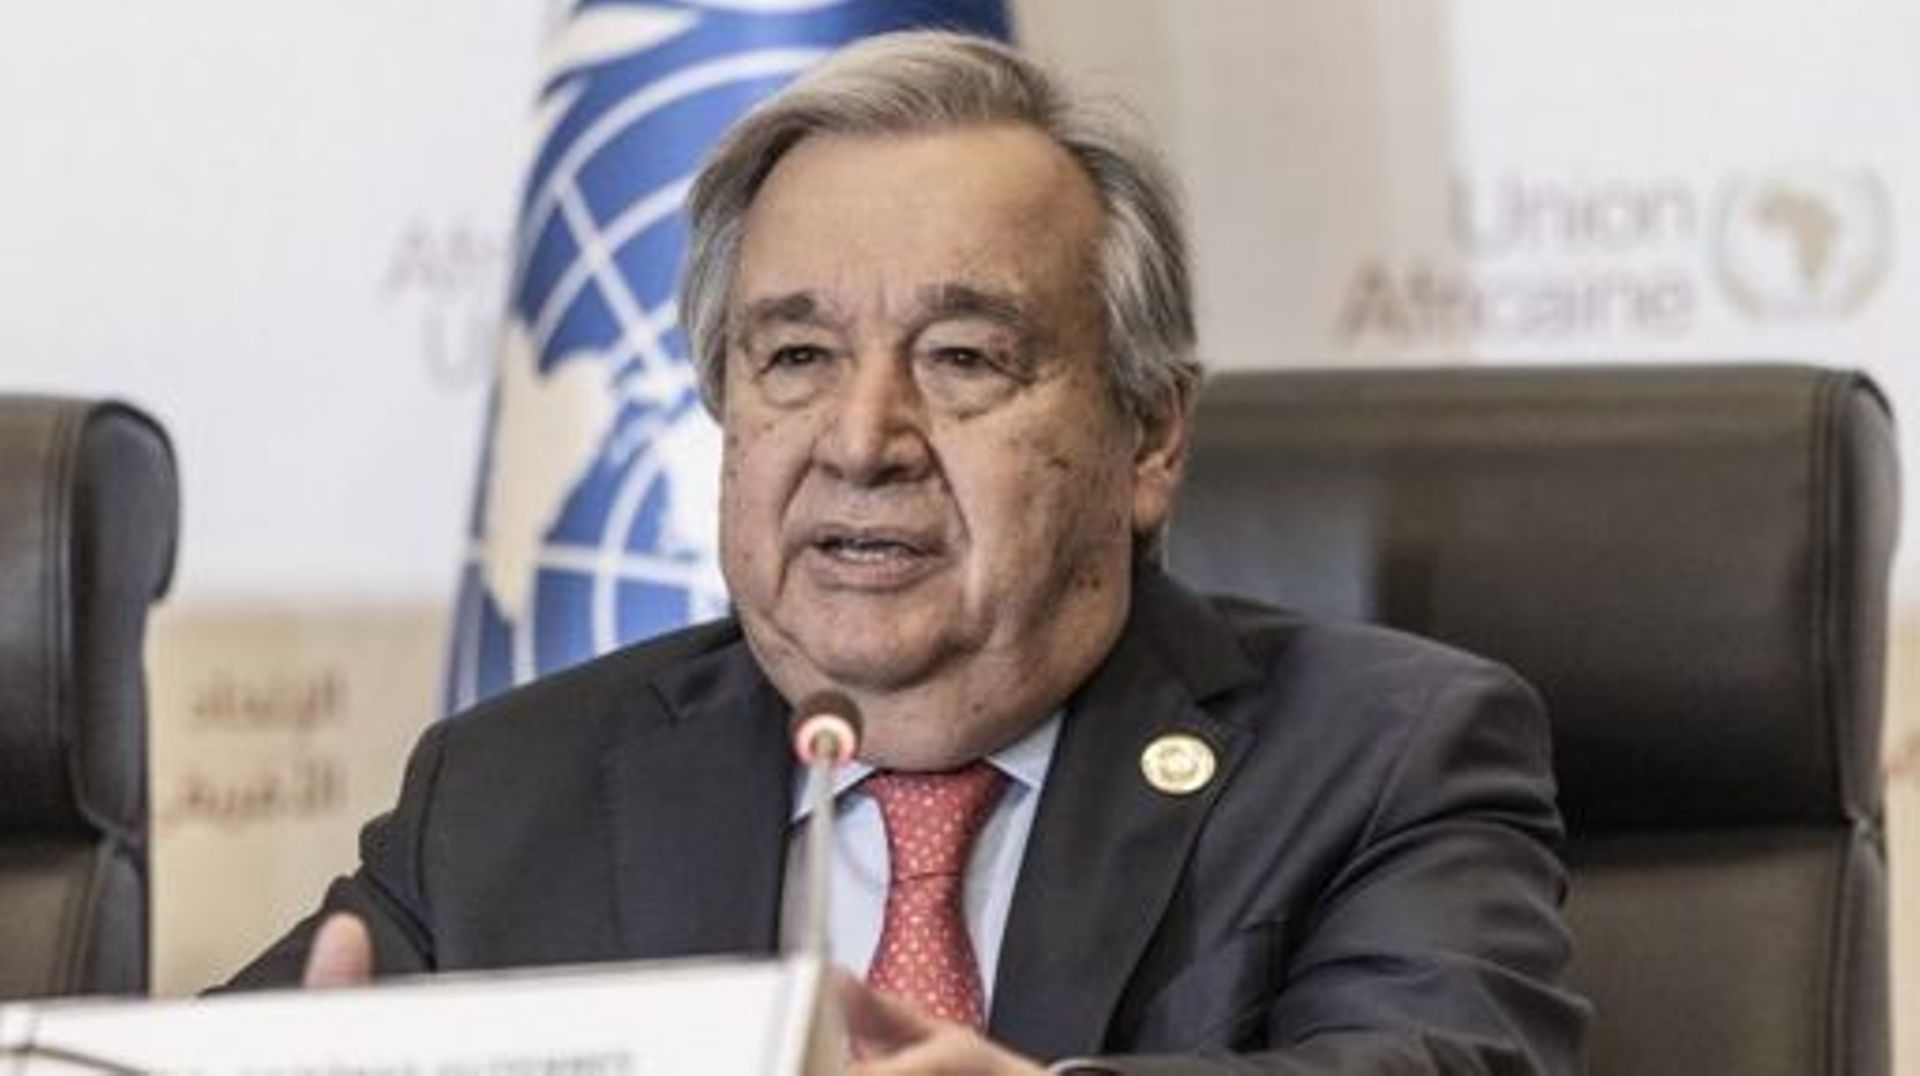 United Nation's Secretary-General Antonio Guterres speaks during a press conference after the end of the 36th Ordinary Session of the Assembly of the African Union (AU) at the Africa Union headquarters in Addis Ababa on February 18, 2023.  Amanuel Sileshi